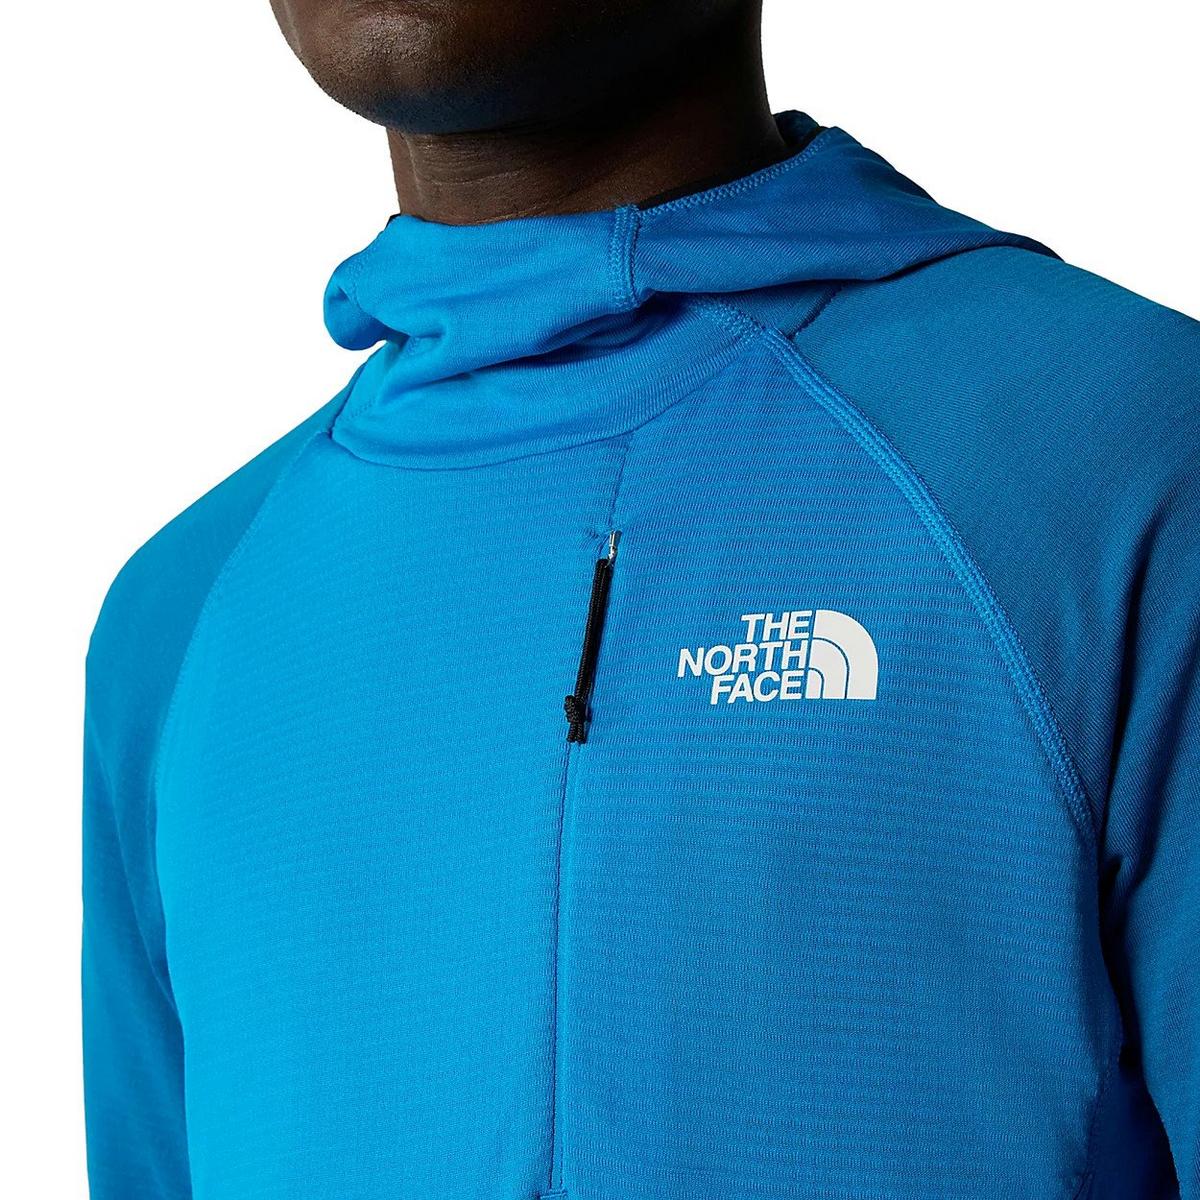 The North Face Men's Bolt Polartec Power Grid Pull On - Blue